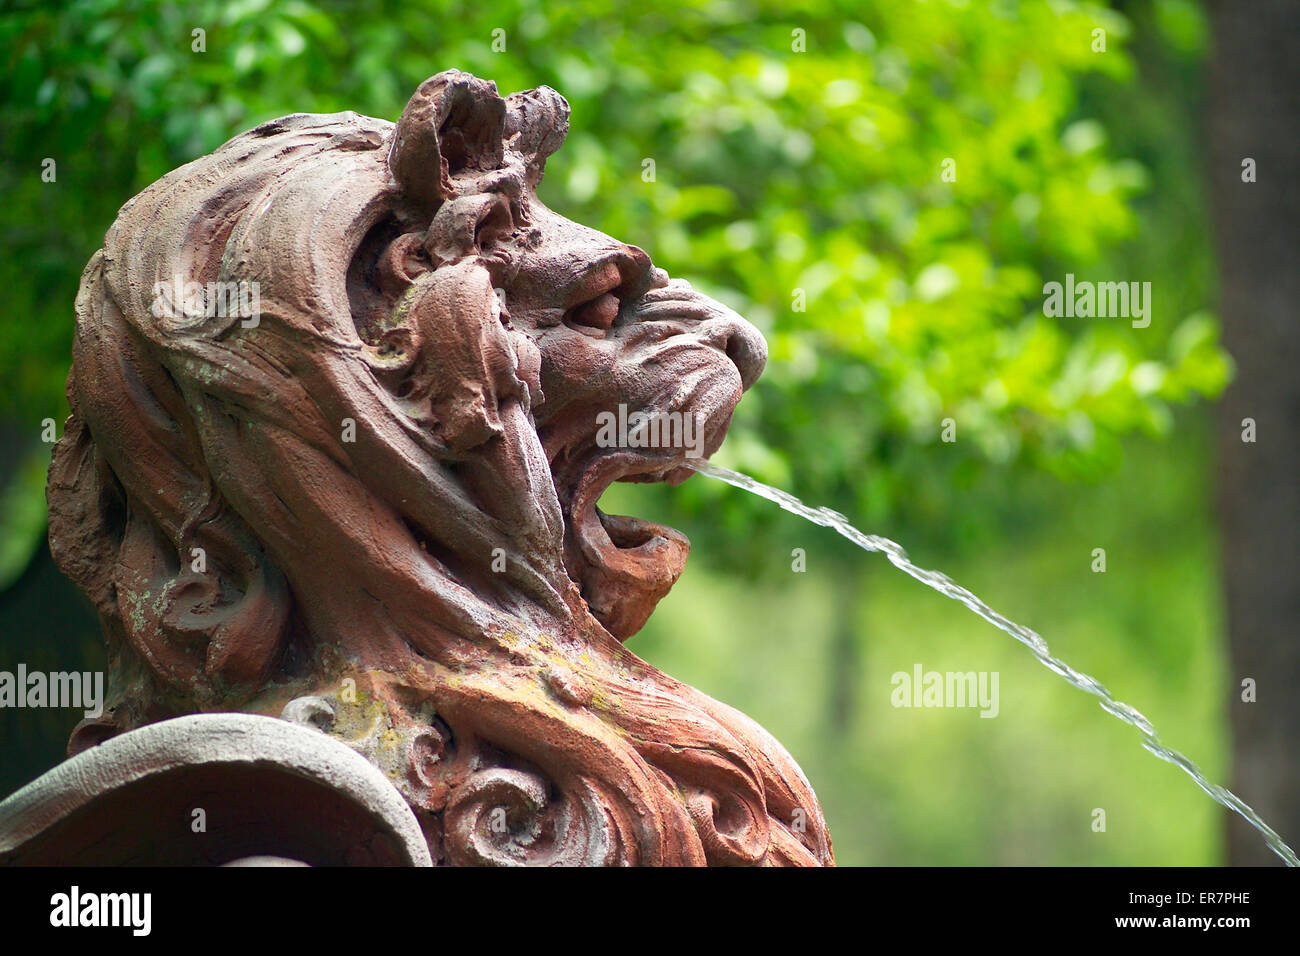 A rough-hewned concrete sculpture of a lion's head shoots a stream of water from its fountain mouth in Savannah, Georgia, USA. Stock Photo